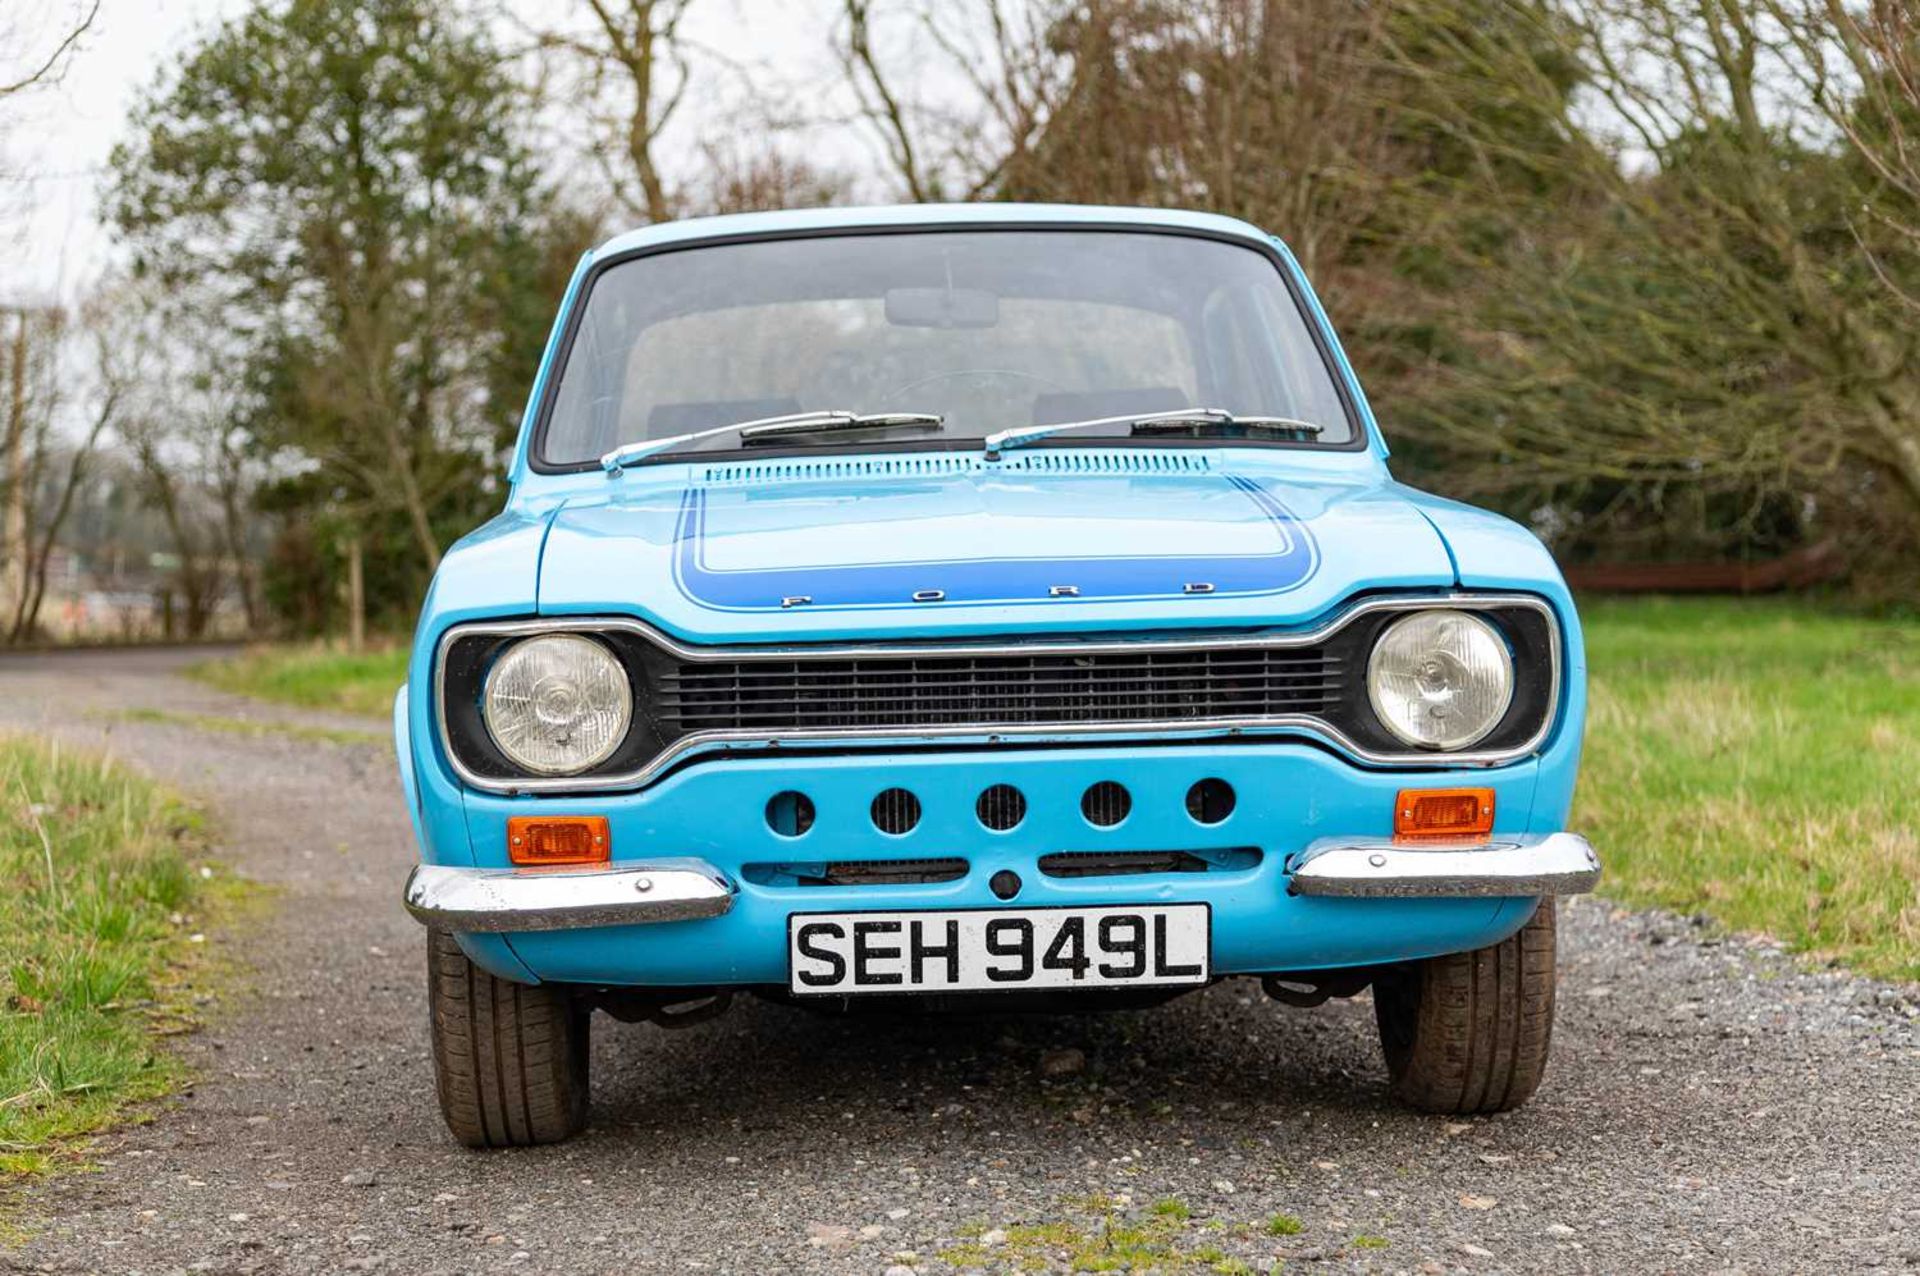 1972 Ford Escort RS2000 Replica  Just two previous keepers from new, with the second owning it for a - Image 3 of 57